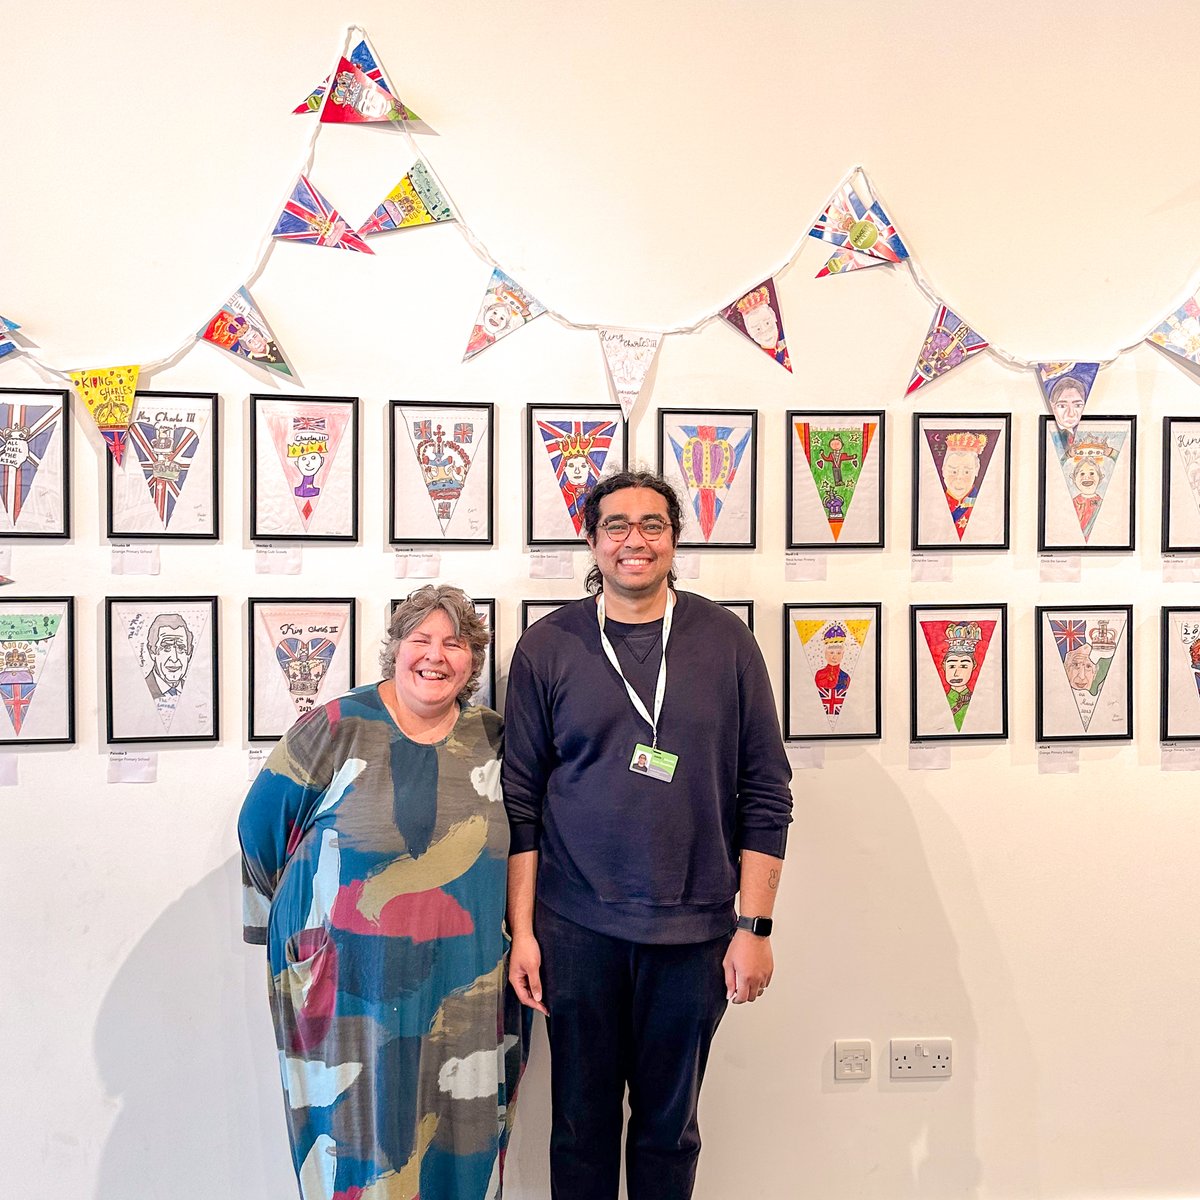 A huge thank you to Mandie the heart and soul of @Openealing Mandie helped the MIE team curate the bunting exhibition ad is hosting it. #communityartproject #makeitealing #ealing